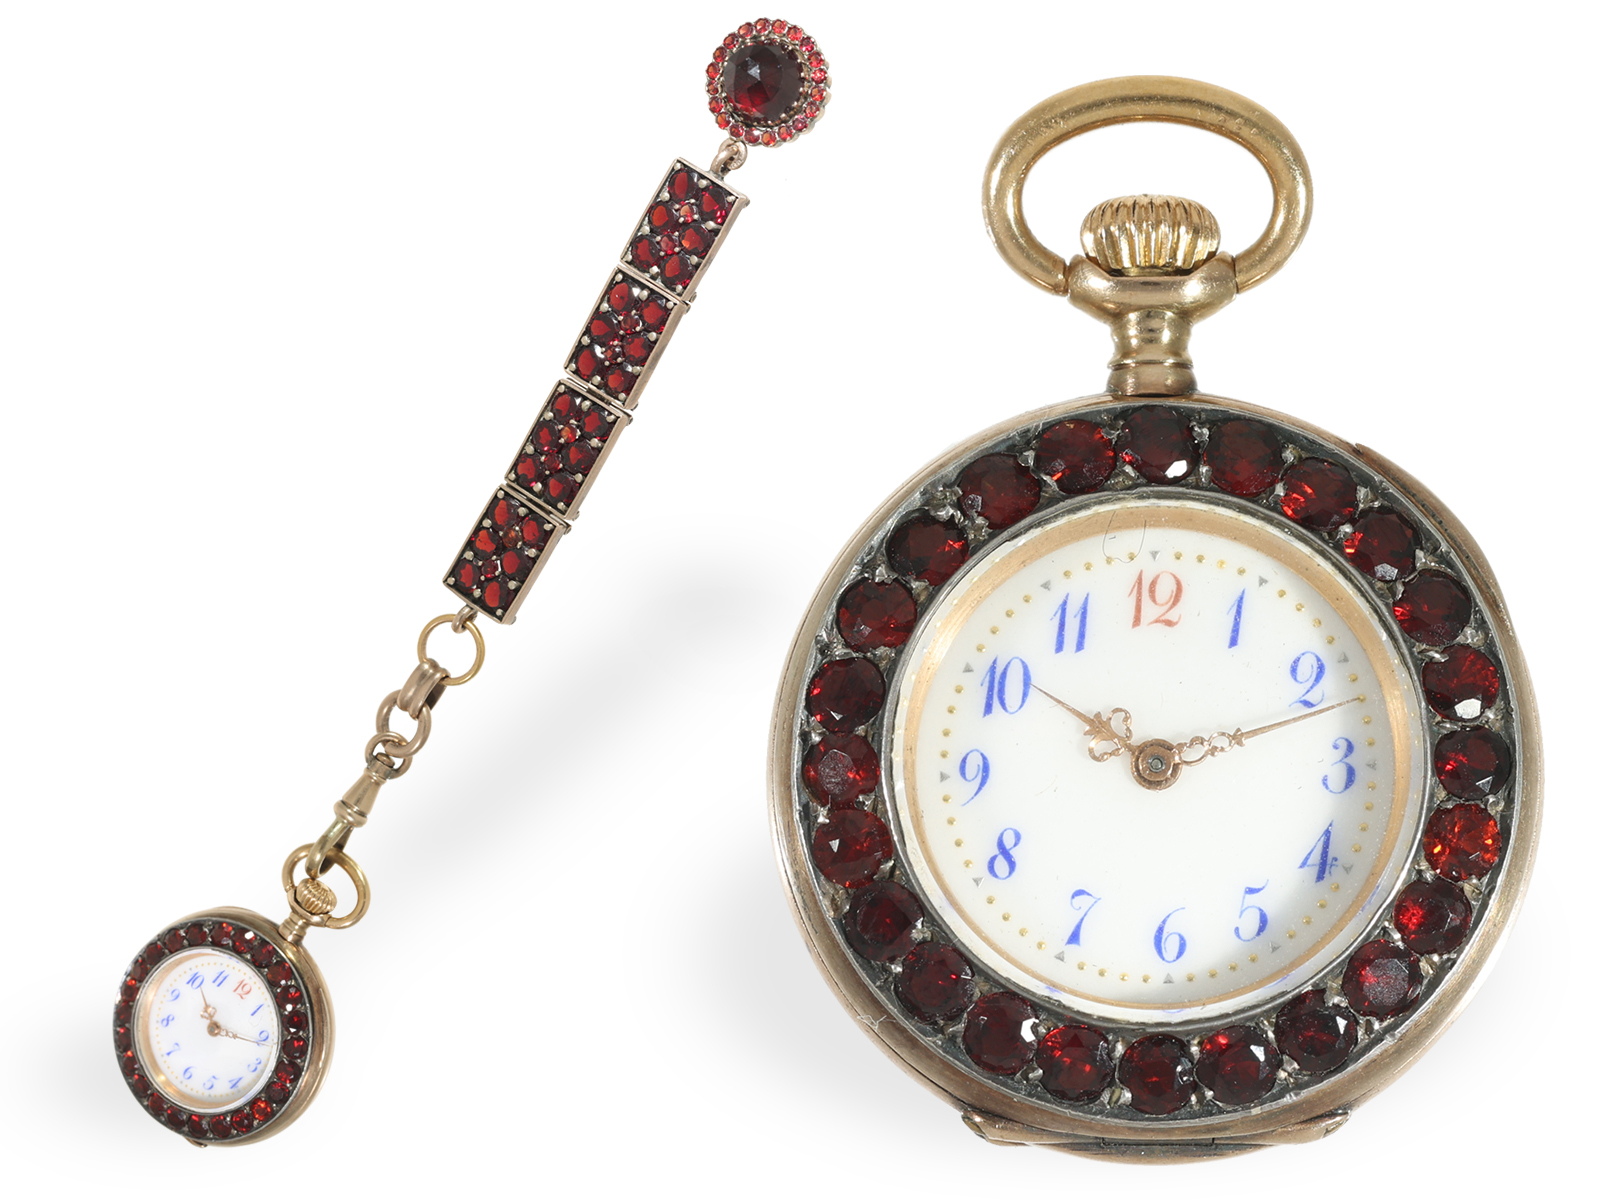 Pocket watch/pendant watch: exquisite ladies' watch with stone setting and chatelaine, Fritz Piguet 